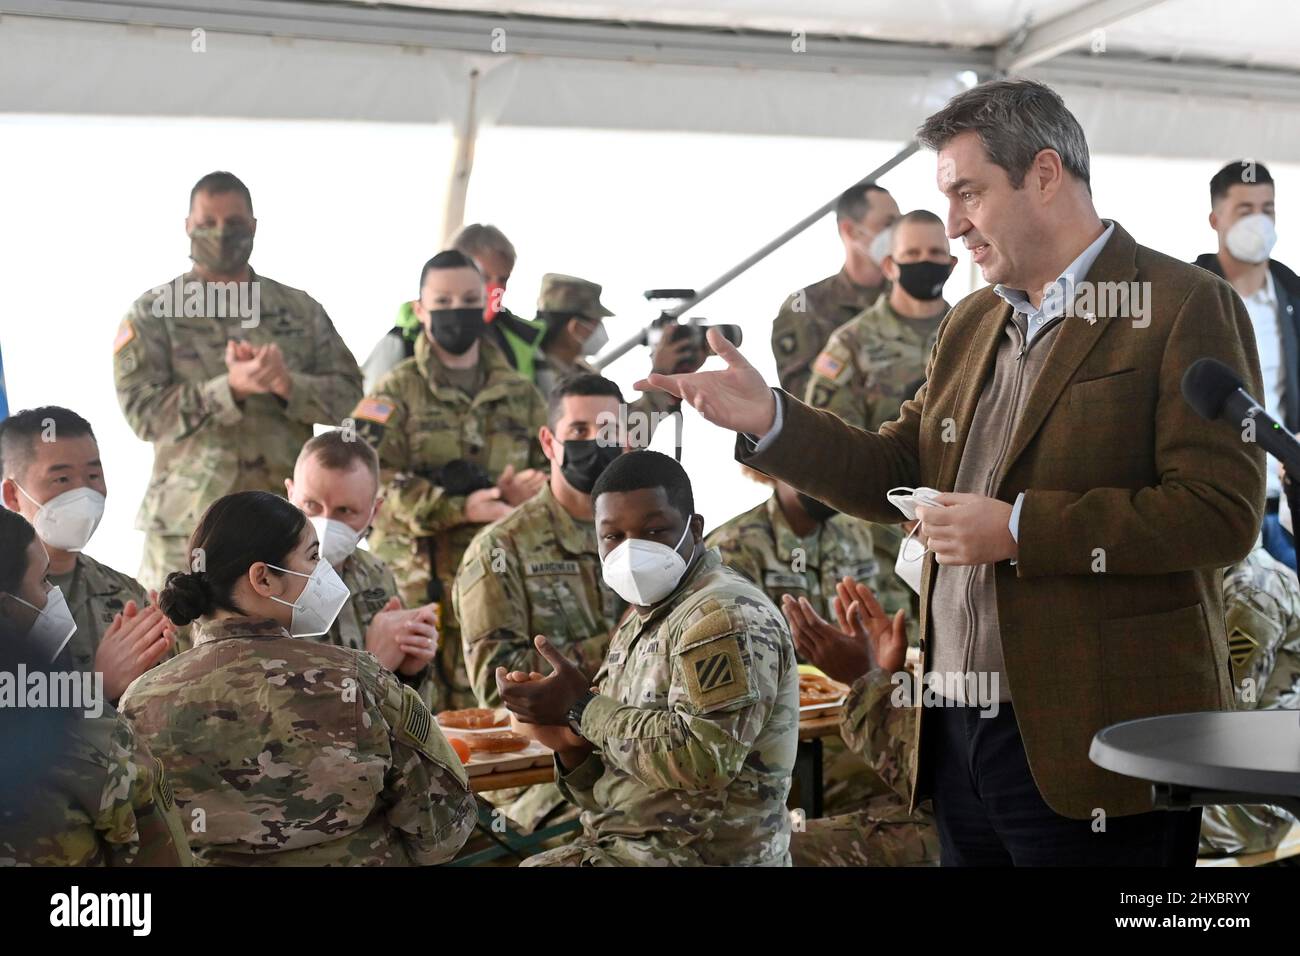 Markus SOEDER (Prime Minister of Bavaria and CSU Chairman) speaks to American soldiers on the occasion of a Weisswurst meal. Prime Minister Dr. Markus Soeder visits the US military training area Grafenwoehr, headquarters of the 7th Army Training Command on March 11th, 2022. Stock Photo